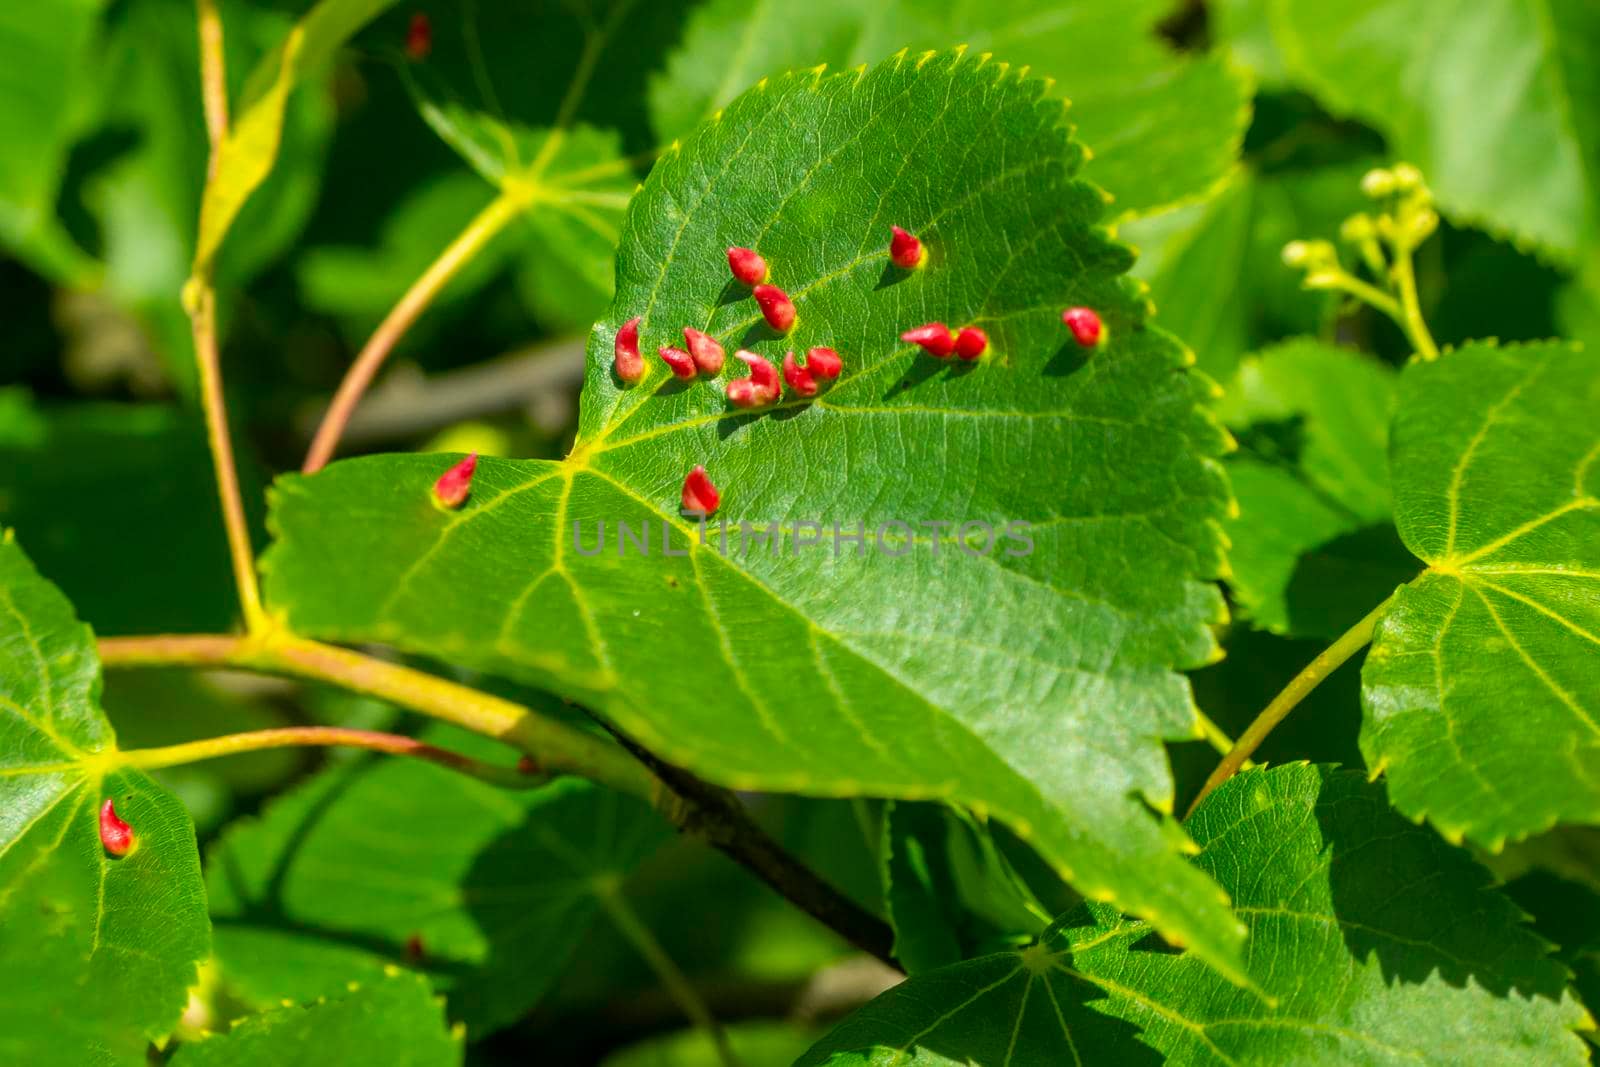 Lime nail gall caused by red nail gall mite Eriophyes tiliae on the leaves of common lime. by kajasja